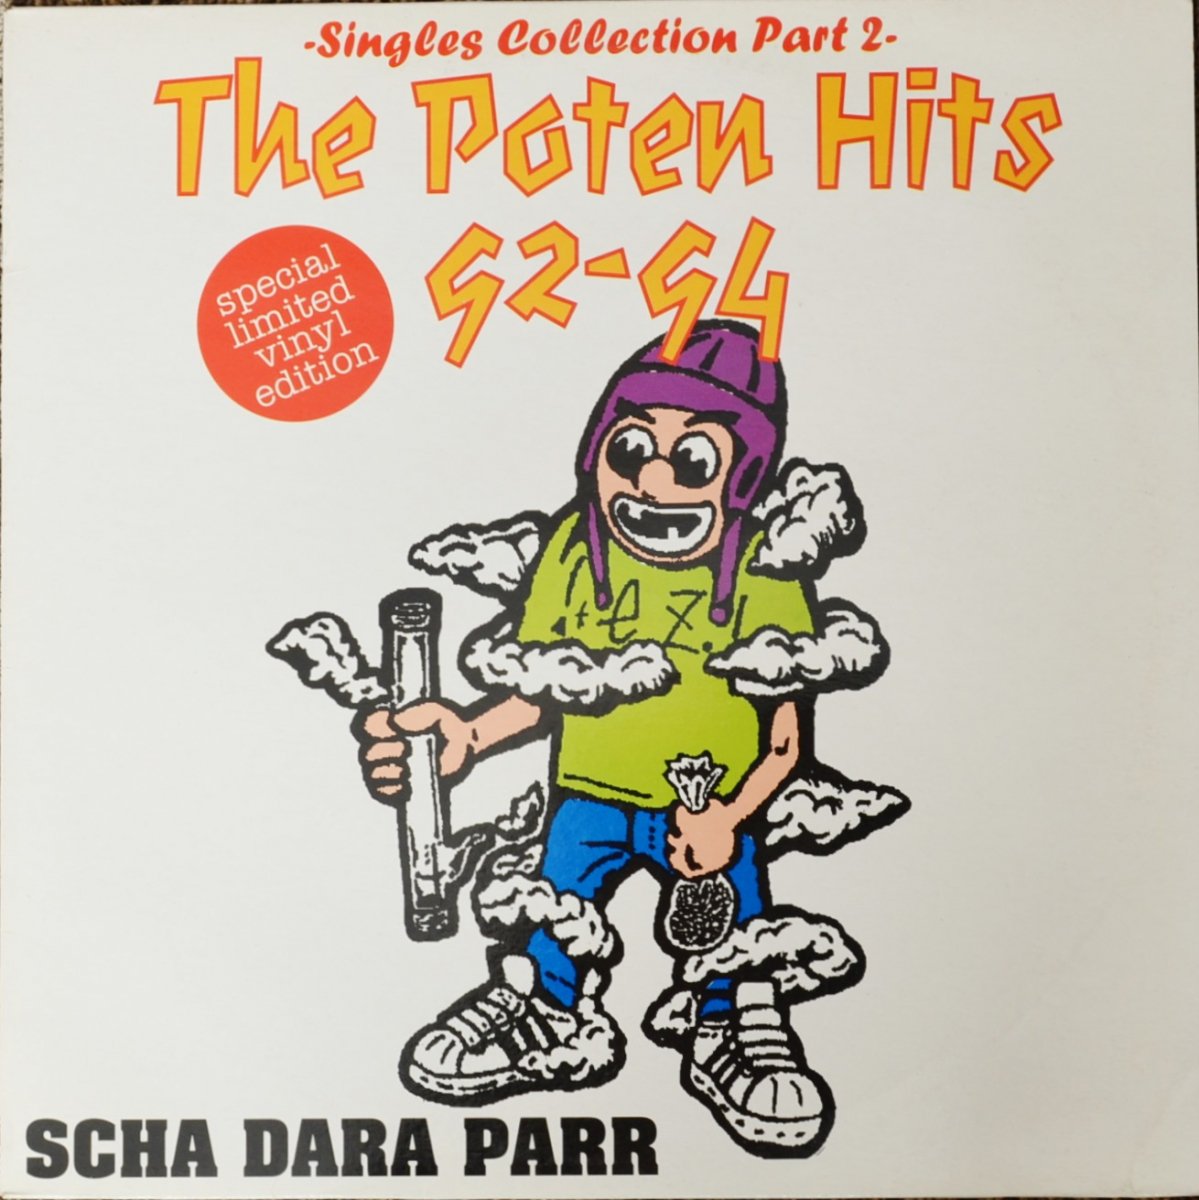 ѡ (SCHADARAPARR) / THE POTEN HITS 92-94 - SINGLES COLLECTION PART 2 (1LP)